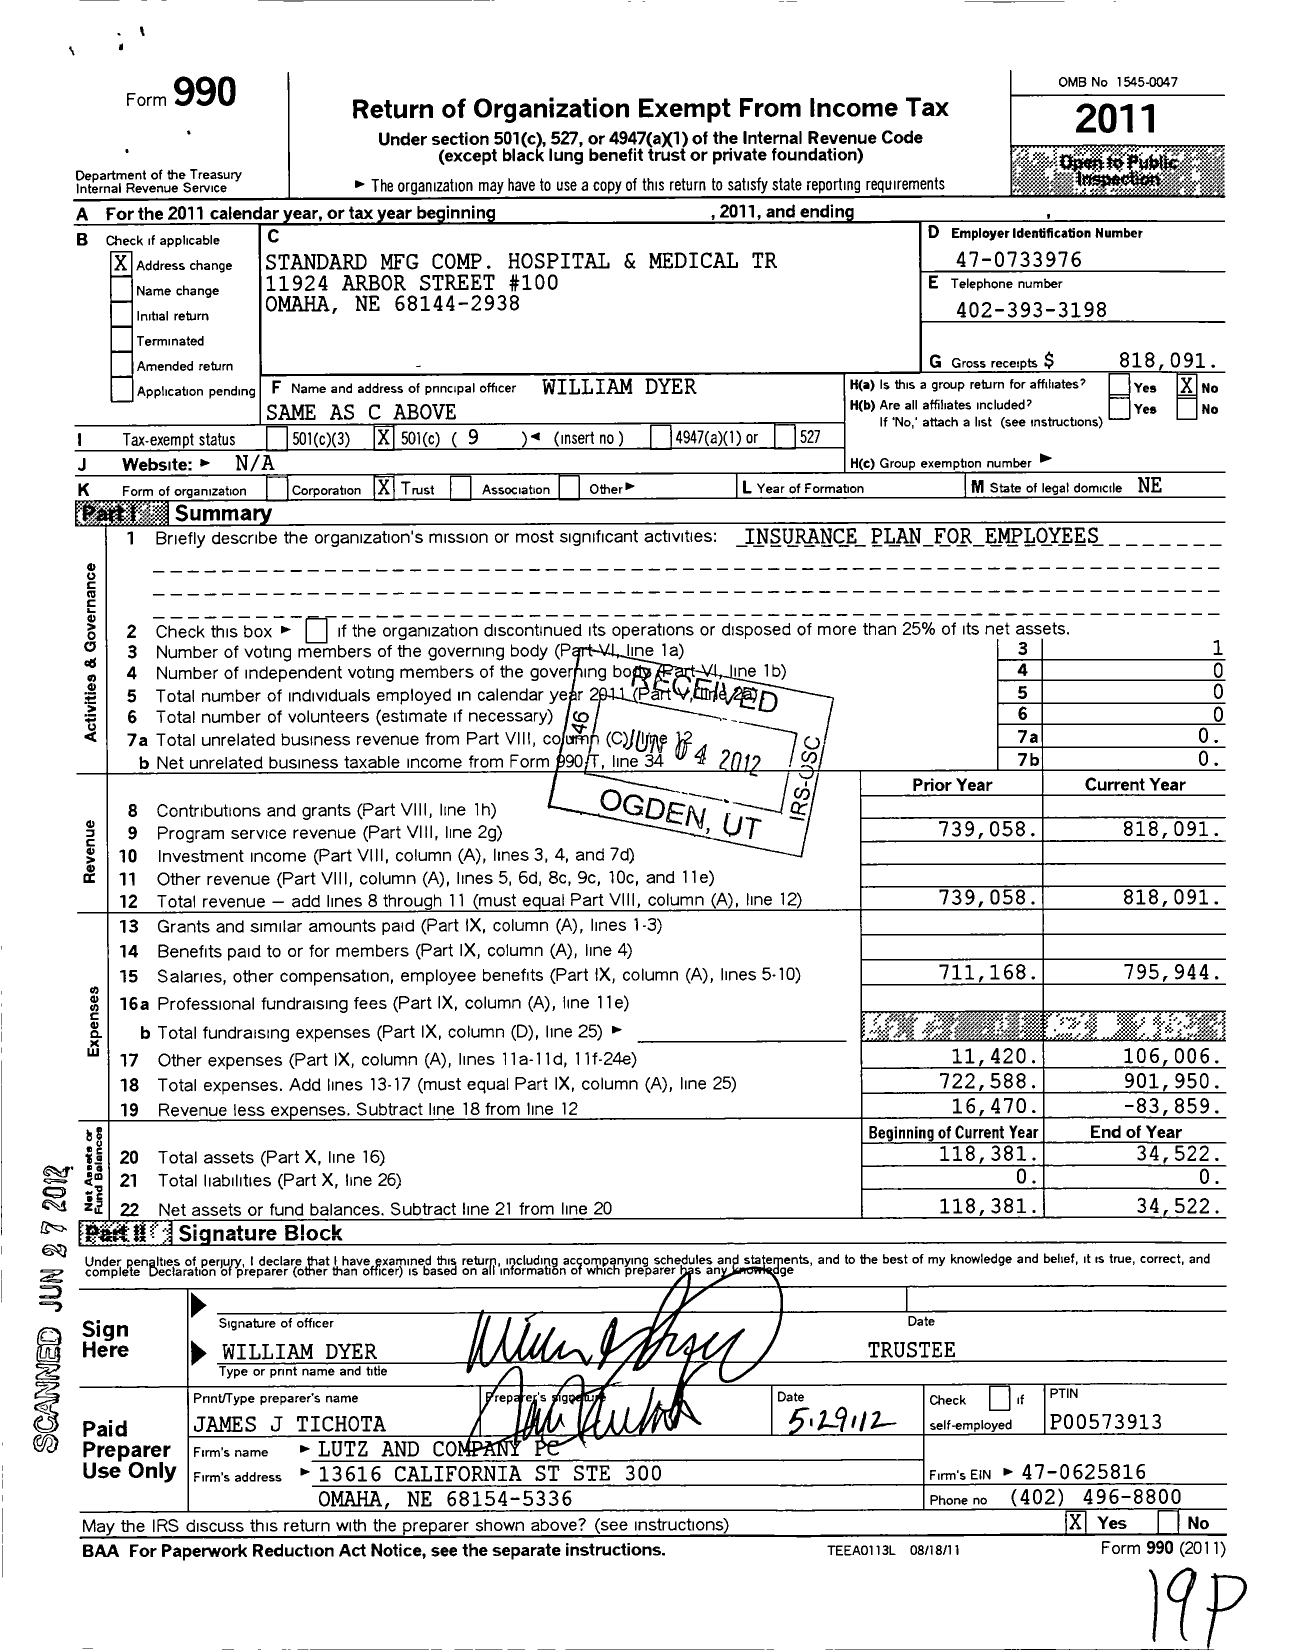 Image of first page of 2011 Form 990O for Standard MFG Comp Hospital and Medical Trust